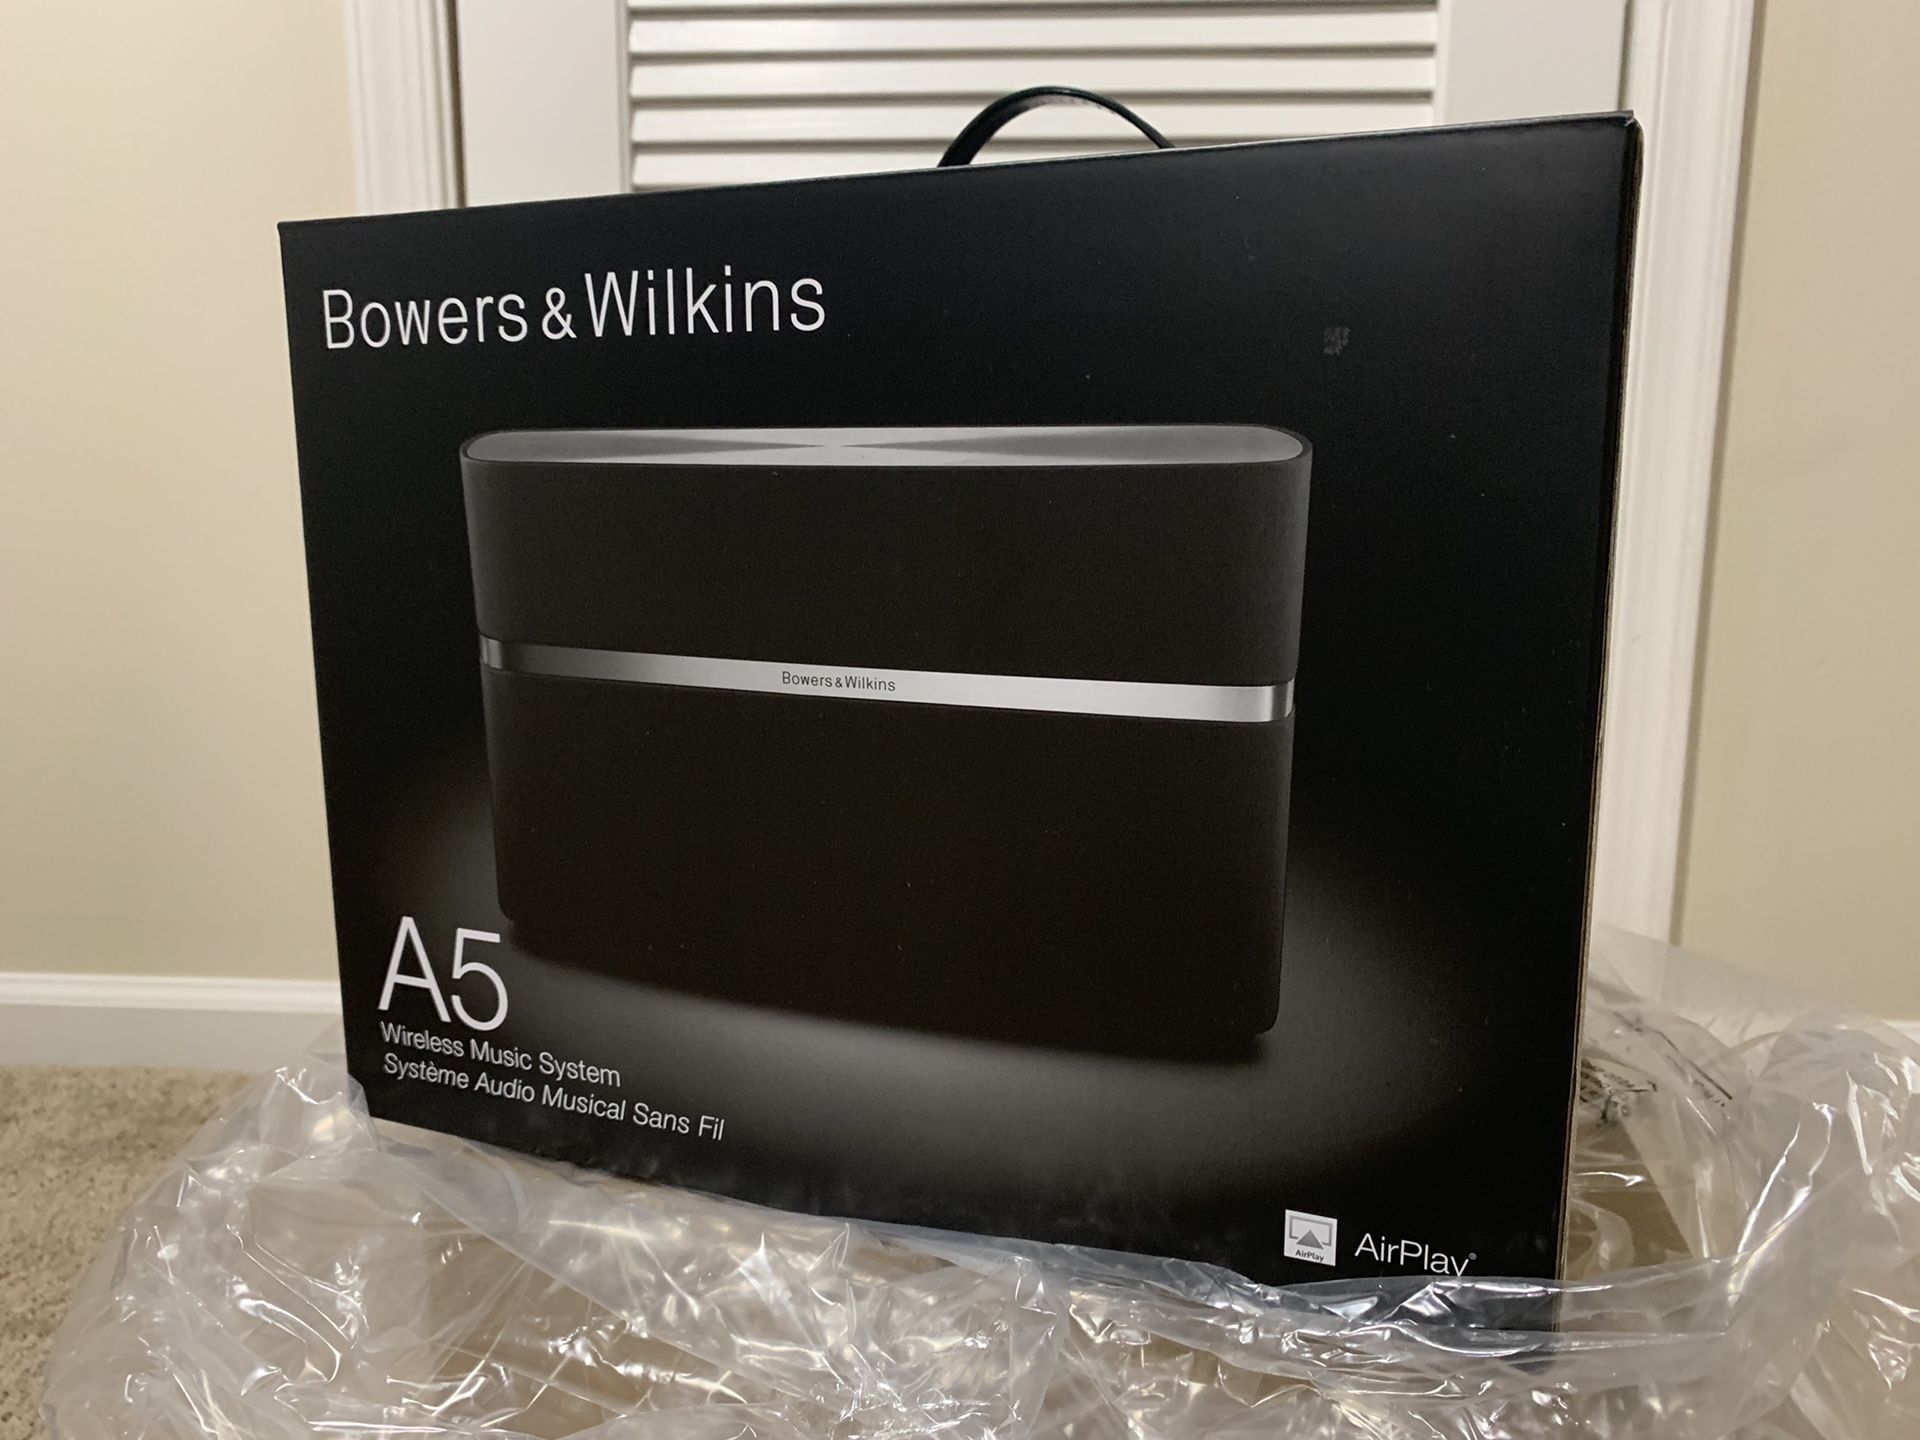 Bowers and Wilkins A5 wireless music system